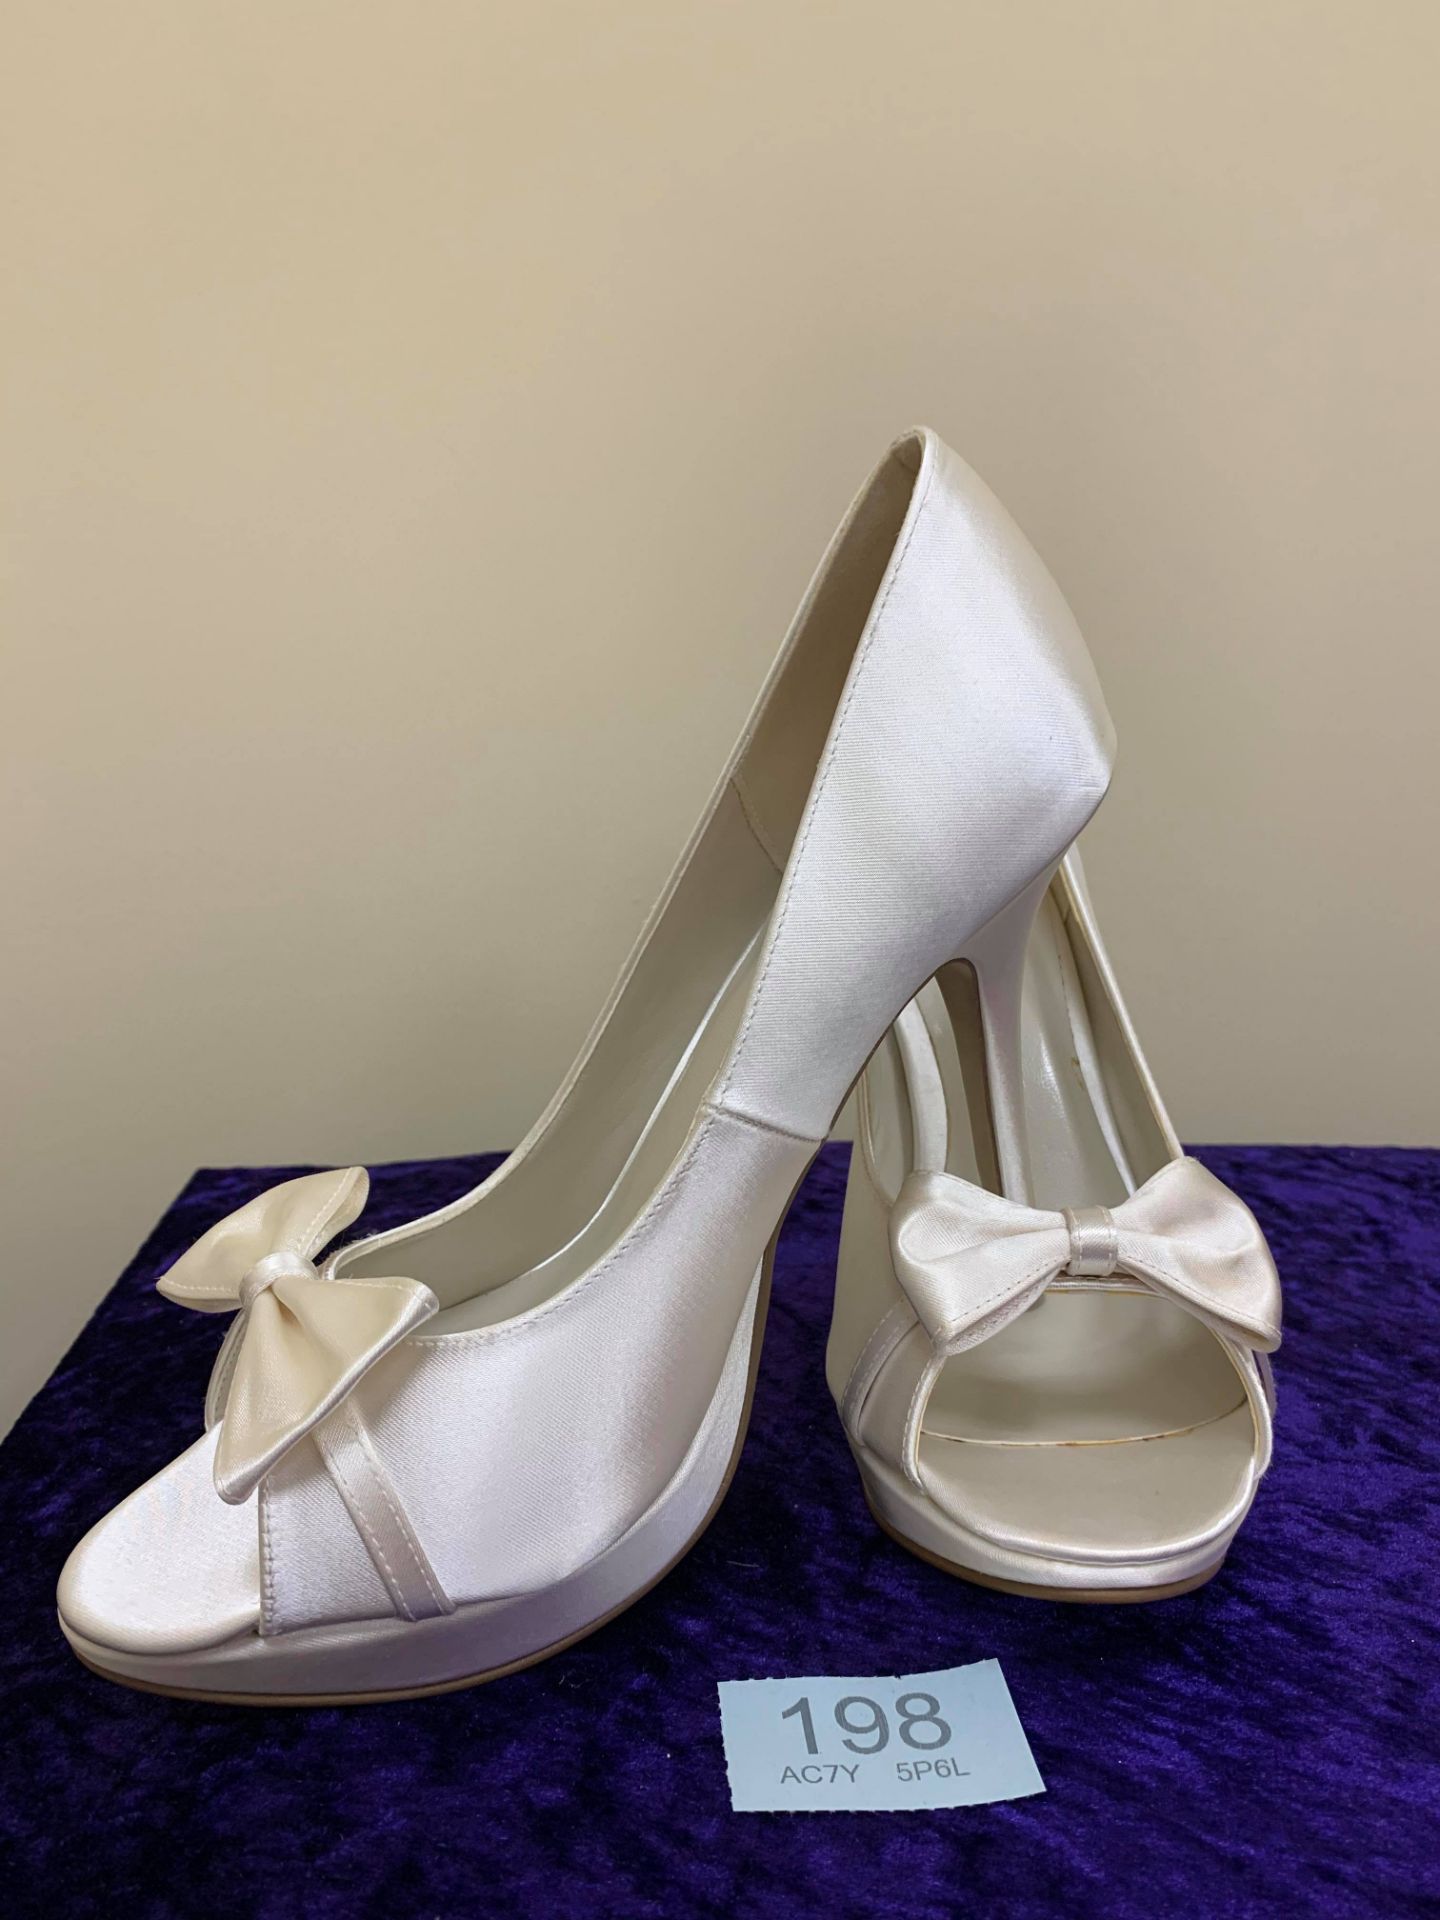 Designer Shoes Ivory In Size 40. Code 198 - Image 2 of 7